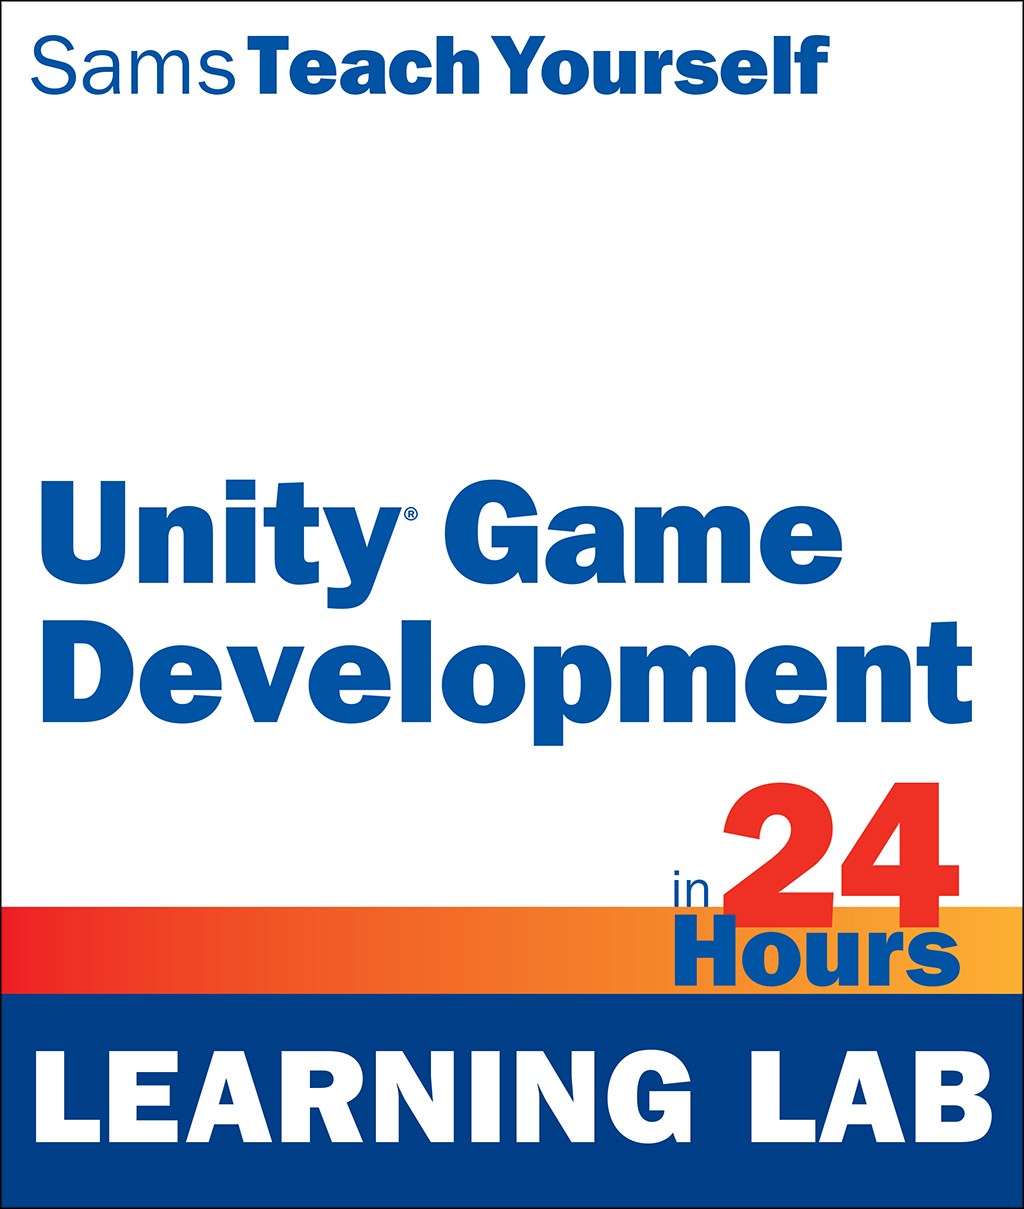 Unity Game Development in 24 Hours, Sams Teach Yourself (Learning Lab), 2nd Edition